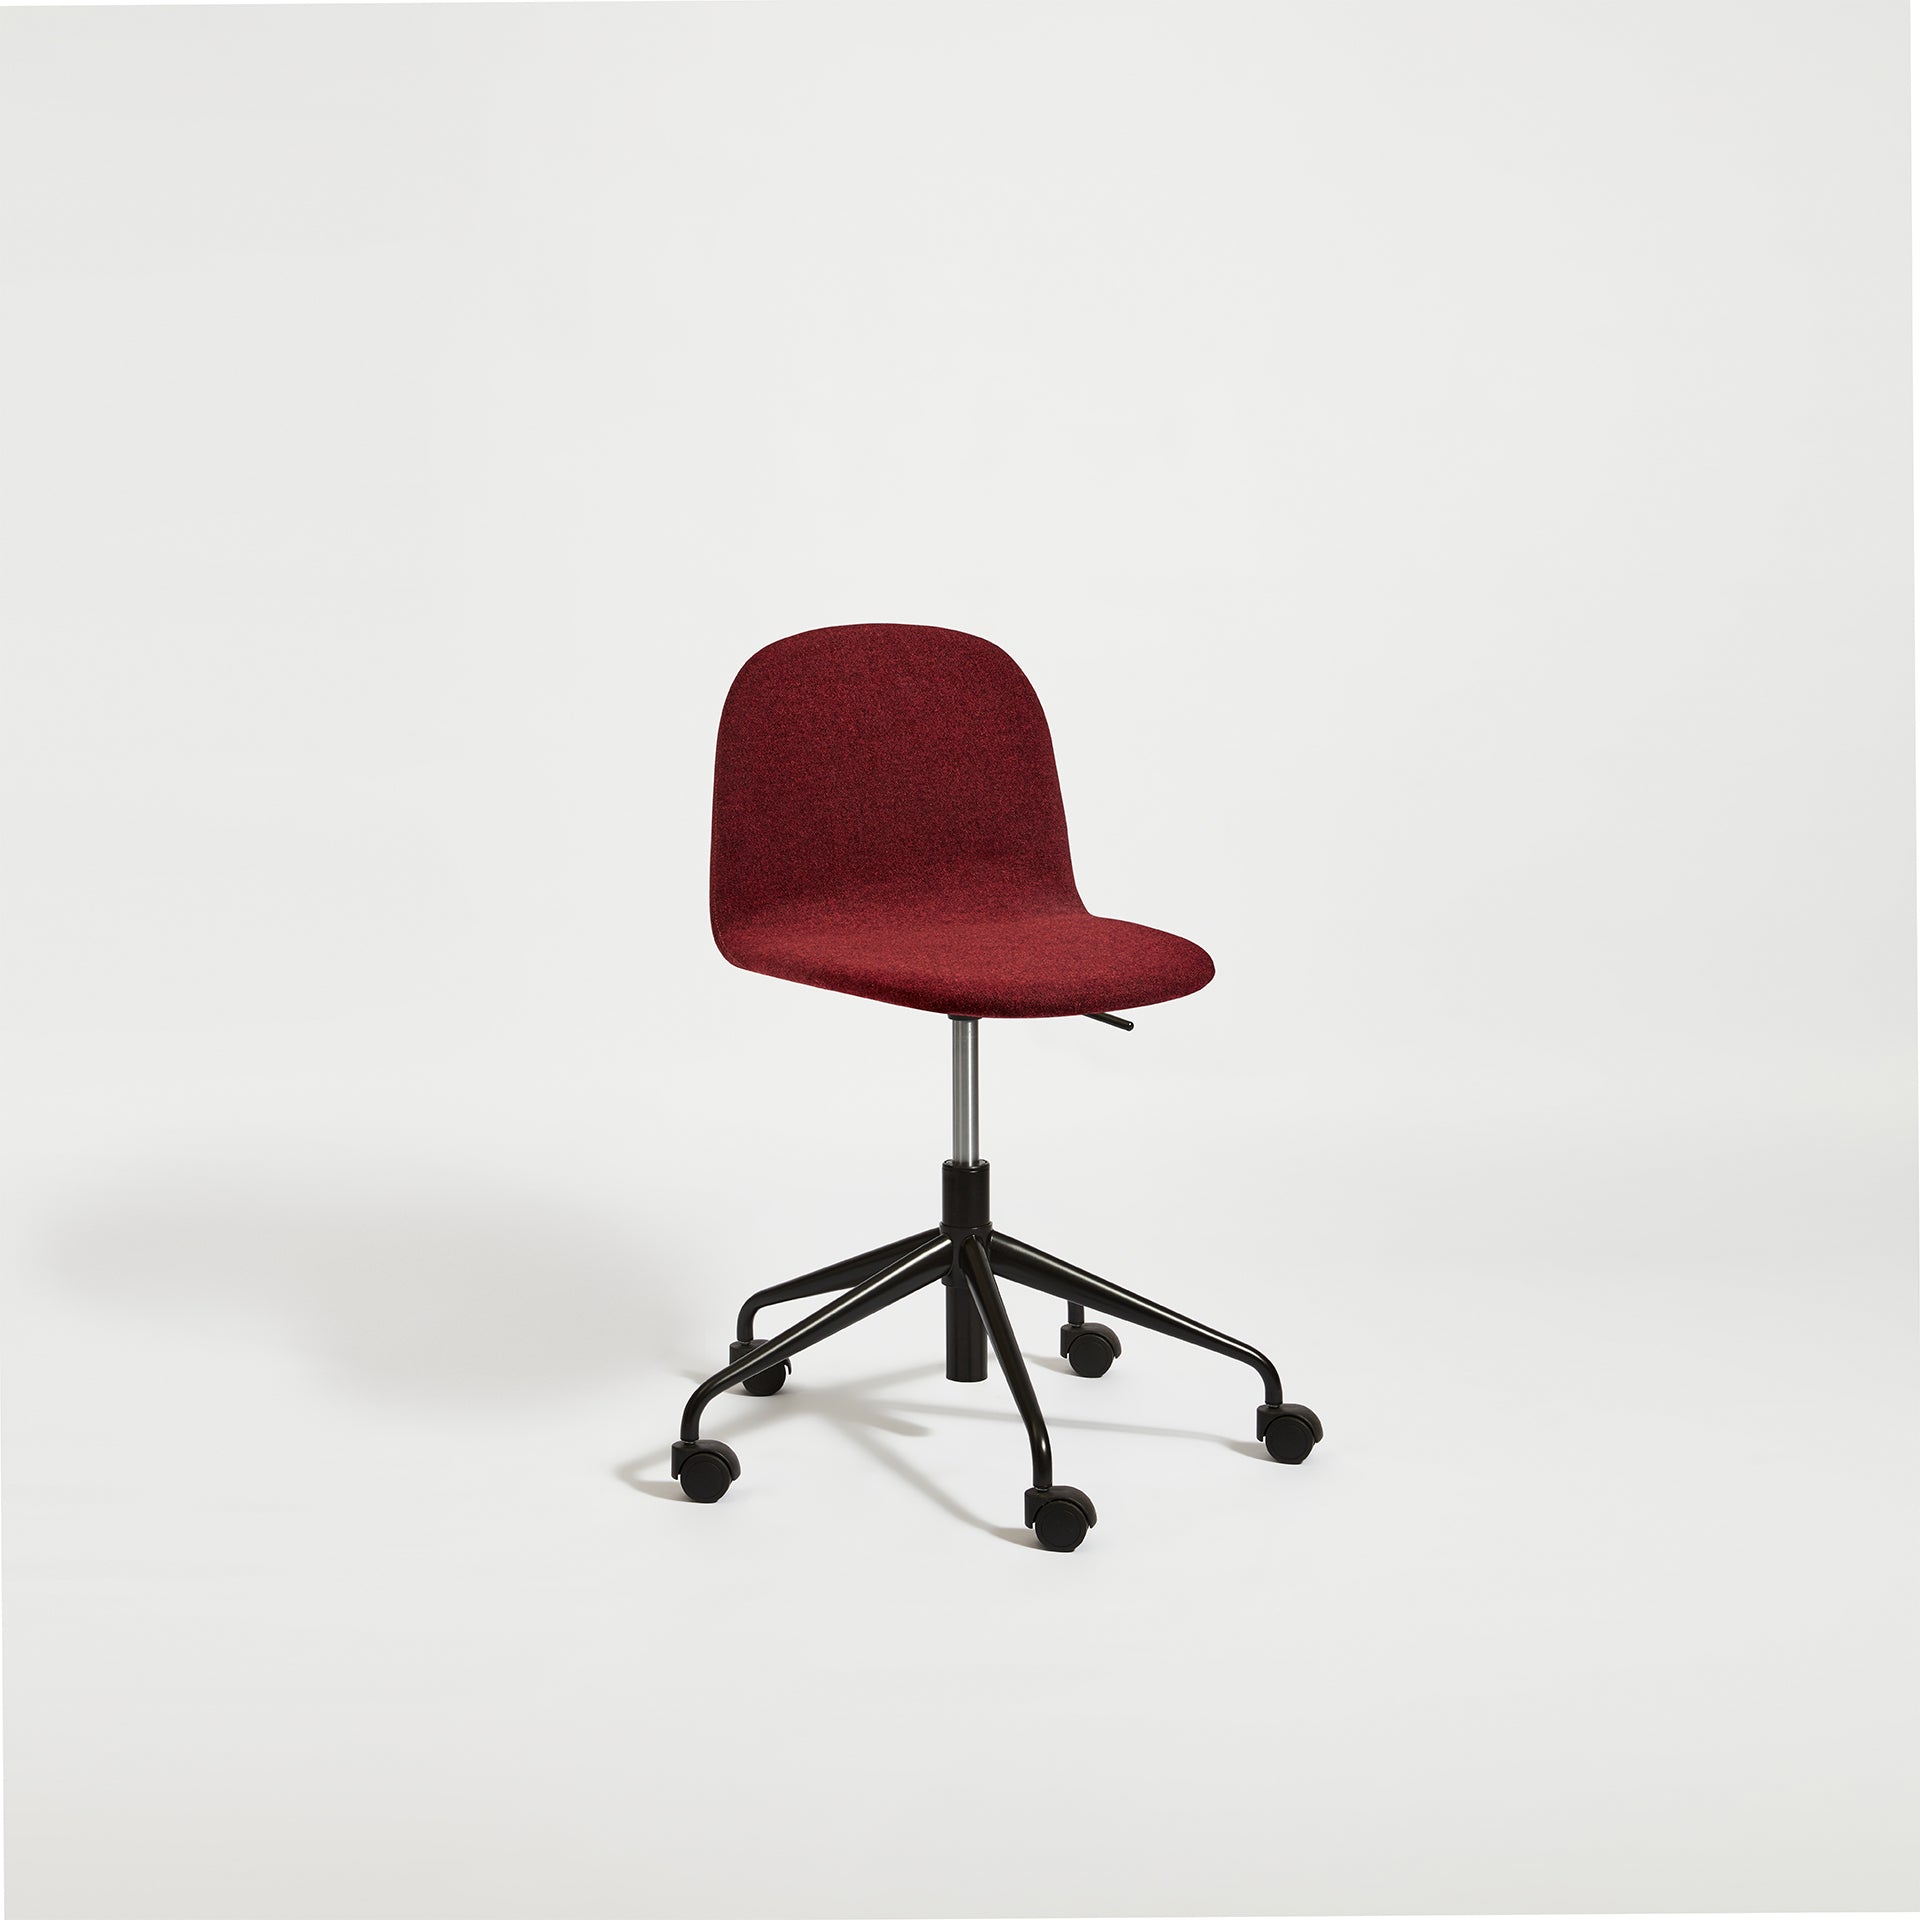 Potato Chair | Swivel Gaslift & Upholstered Dining Office Chair with Handle | GibsonKarlo | DesignByThem